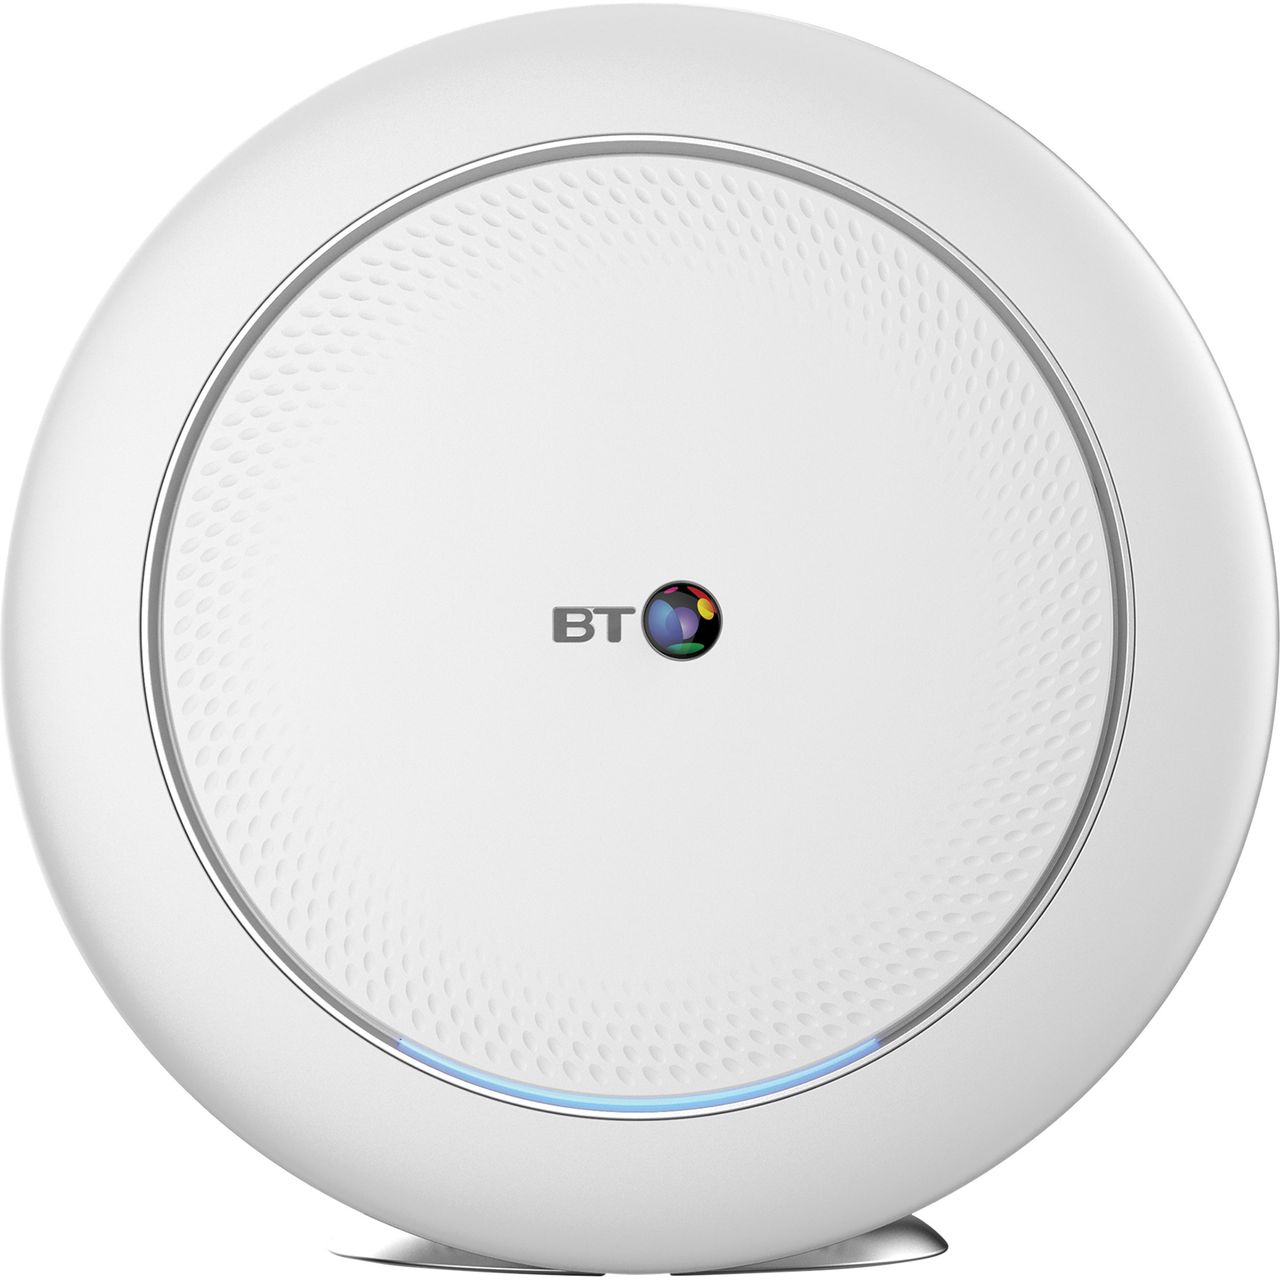 BT Premium Whole Home WiFi Add on disc for Mesh Network Review